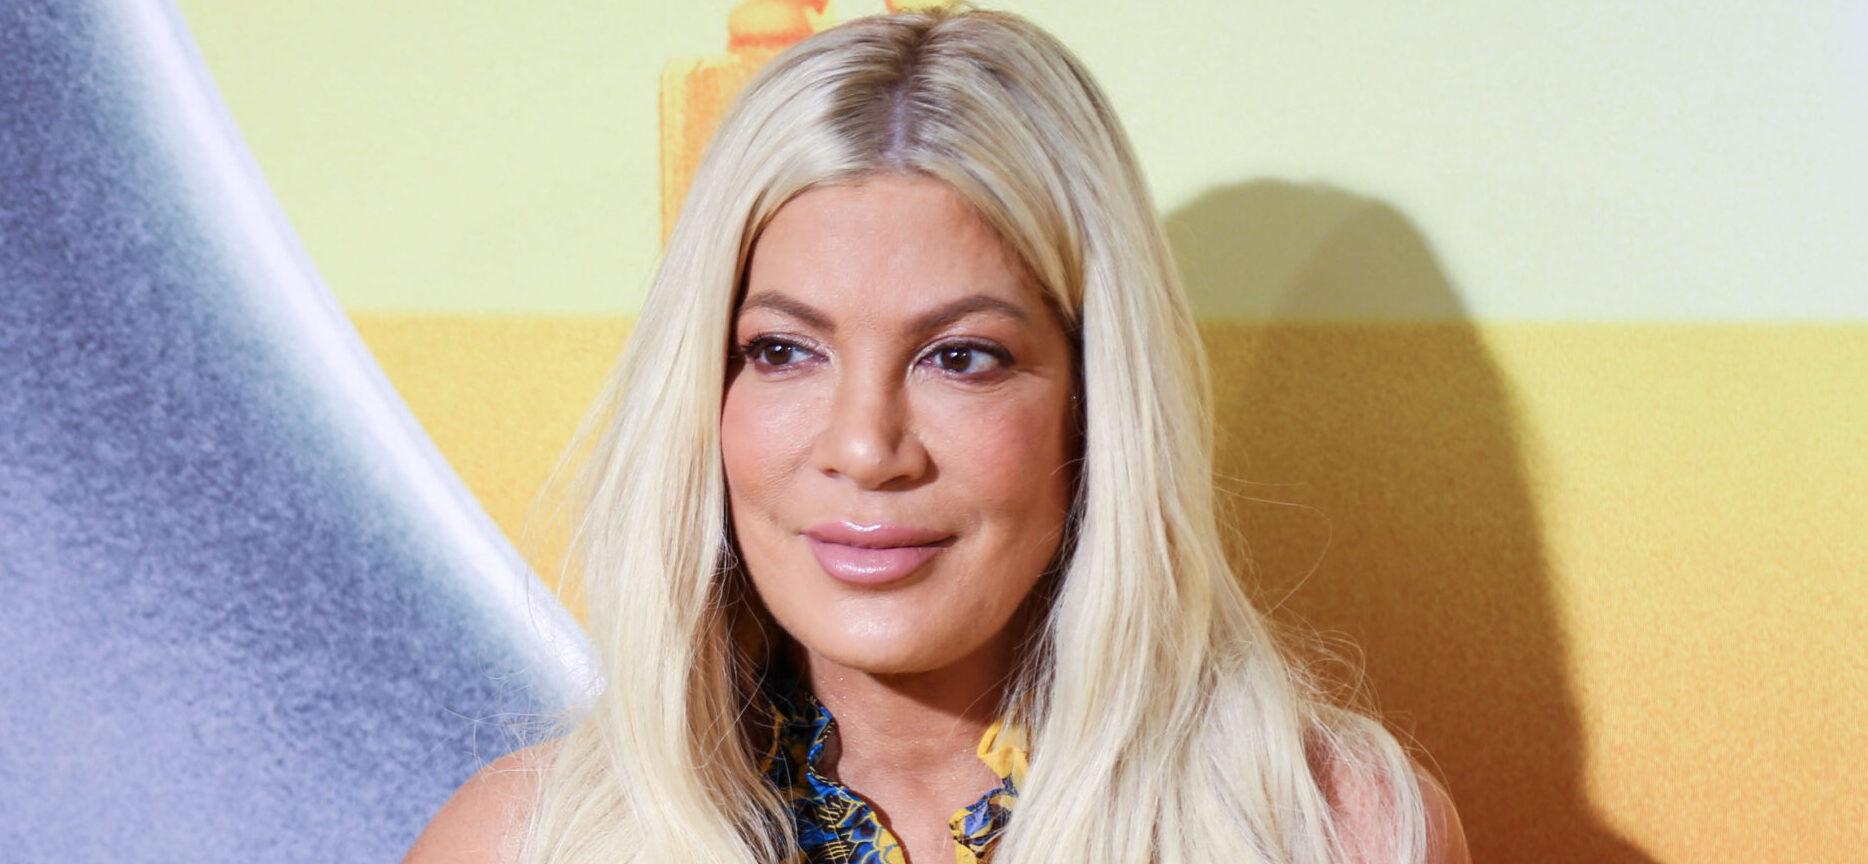 Tori Spelling Applaud Son’s Surgeon As ‘The Recovery Process Begins’